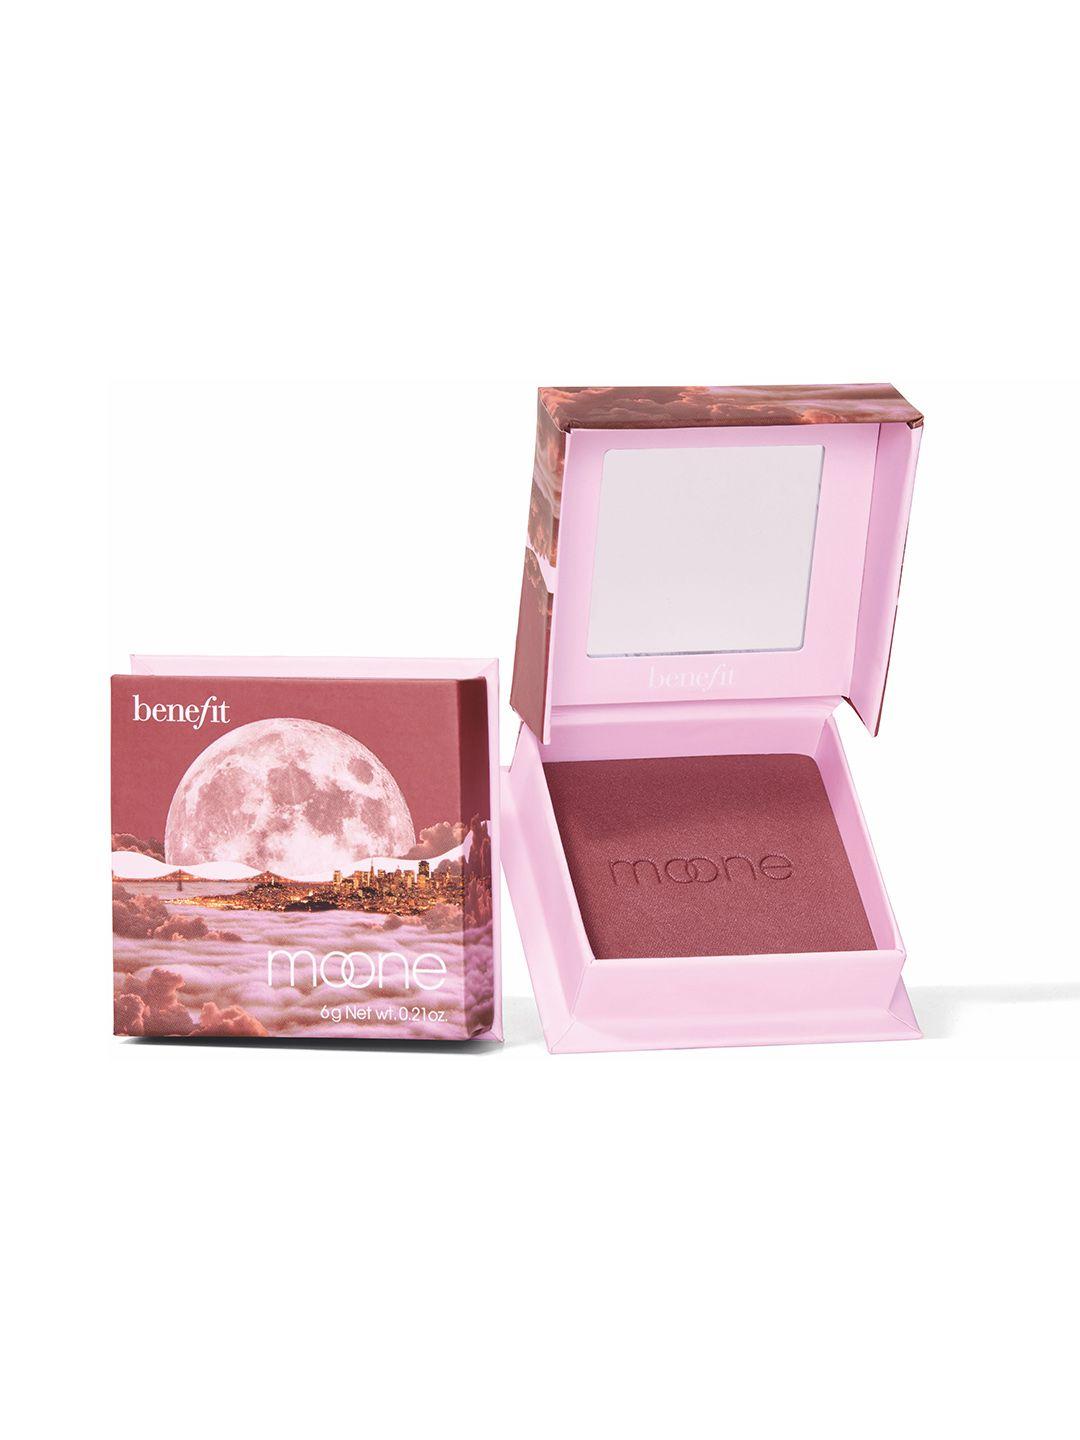 benefit cosmetics smudge-proof soft shimmer finish rich berry blush 6 g - moone